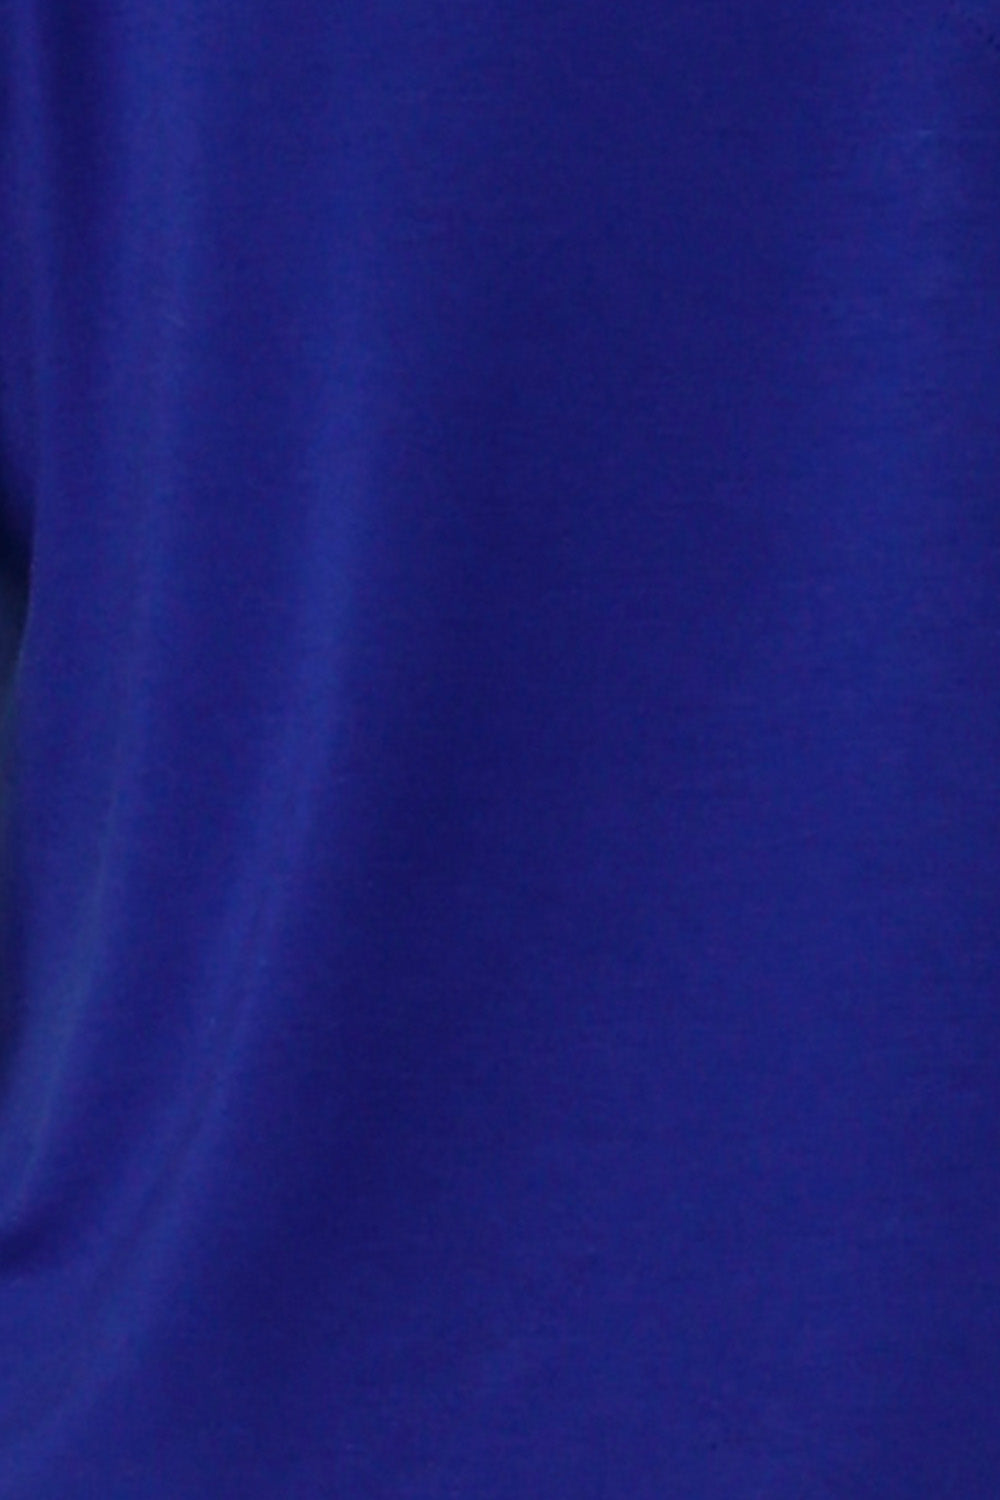 swatch of Australian and New Zealand fashion label L&F's cobalt bamboo jersey fabric used to make women's casual tops.